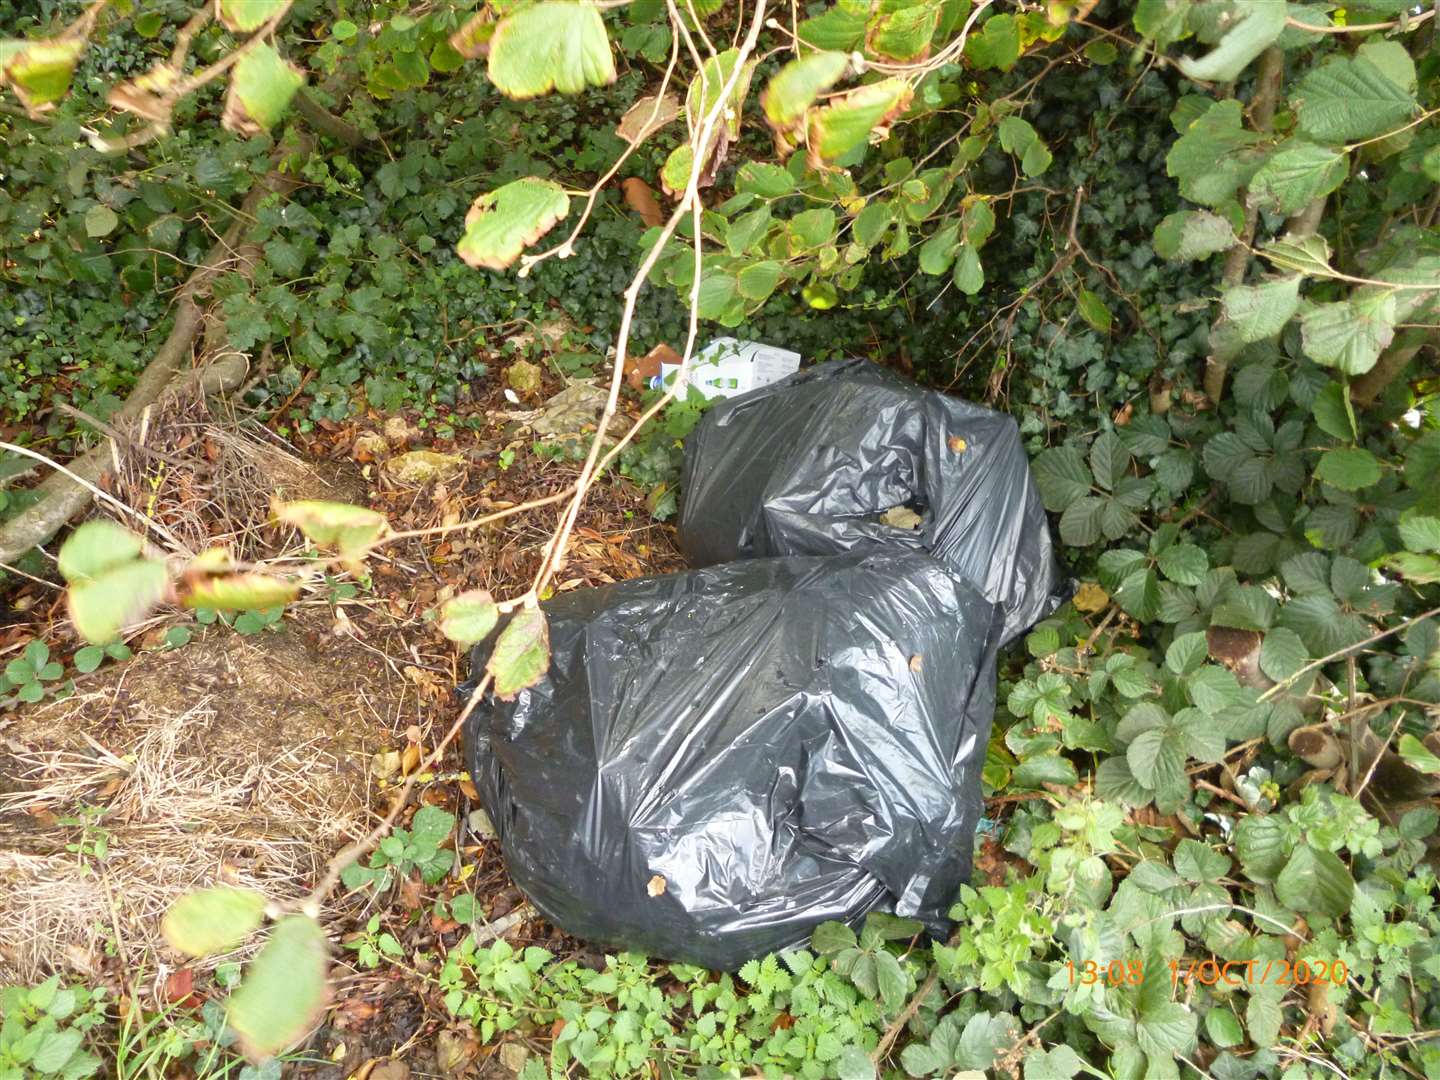 Tow bags of rubbish were found in Capel-le-Ferne. Picture: Dover District Council